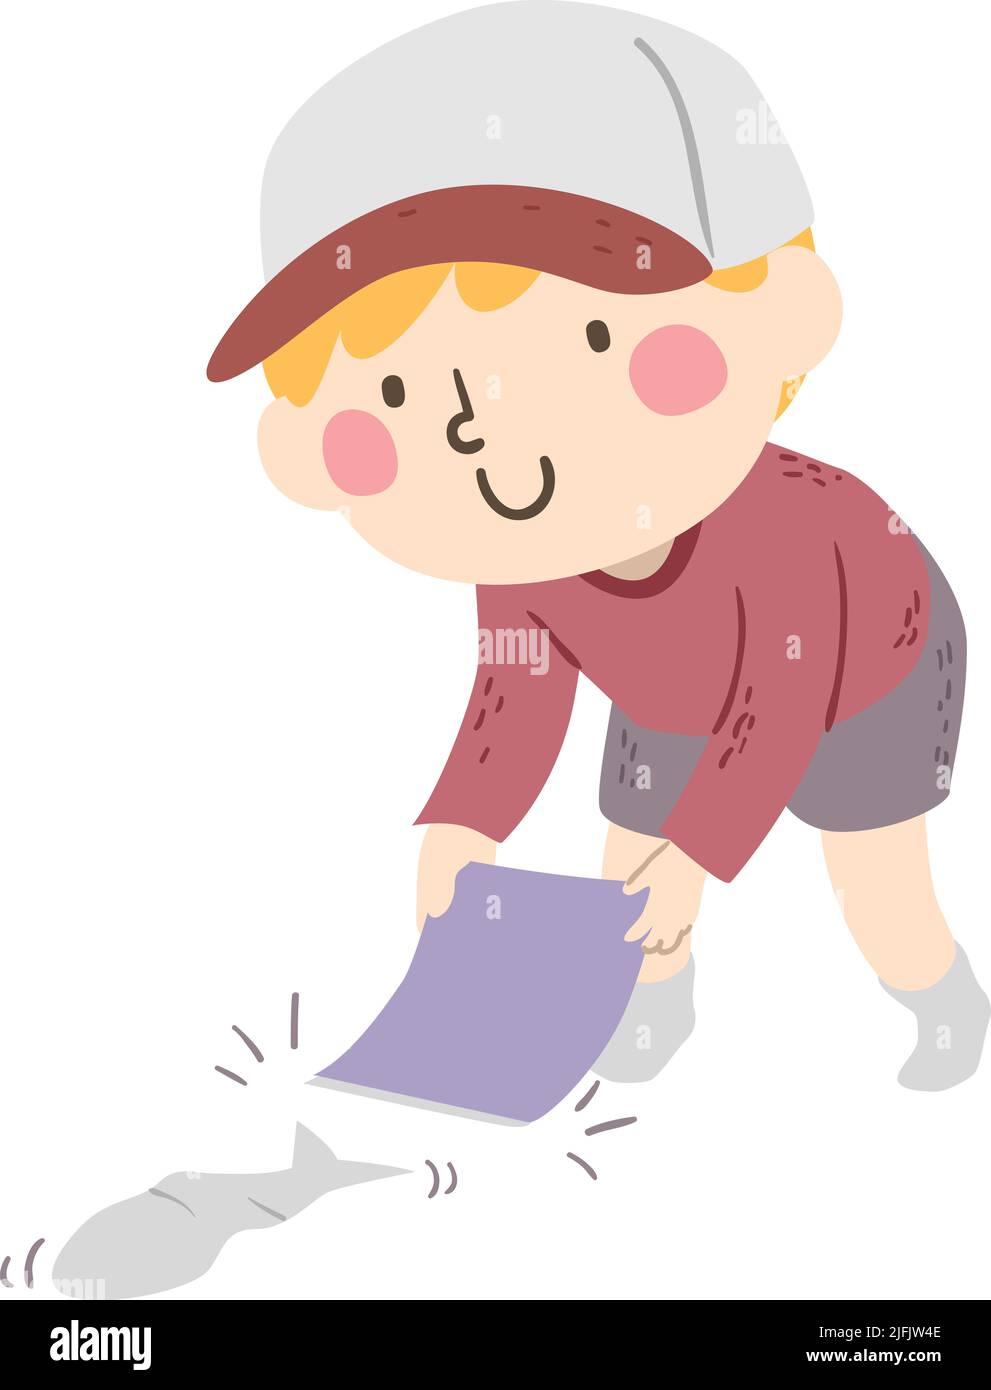 Illustration of a Kid Boy Holding Cardboard and Fanning a Paper Fish in a Race Stock Photo